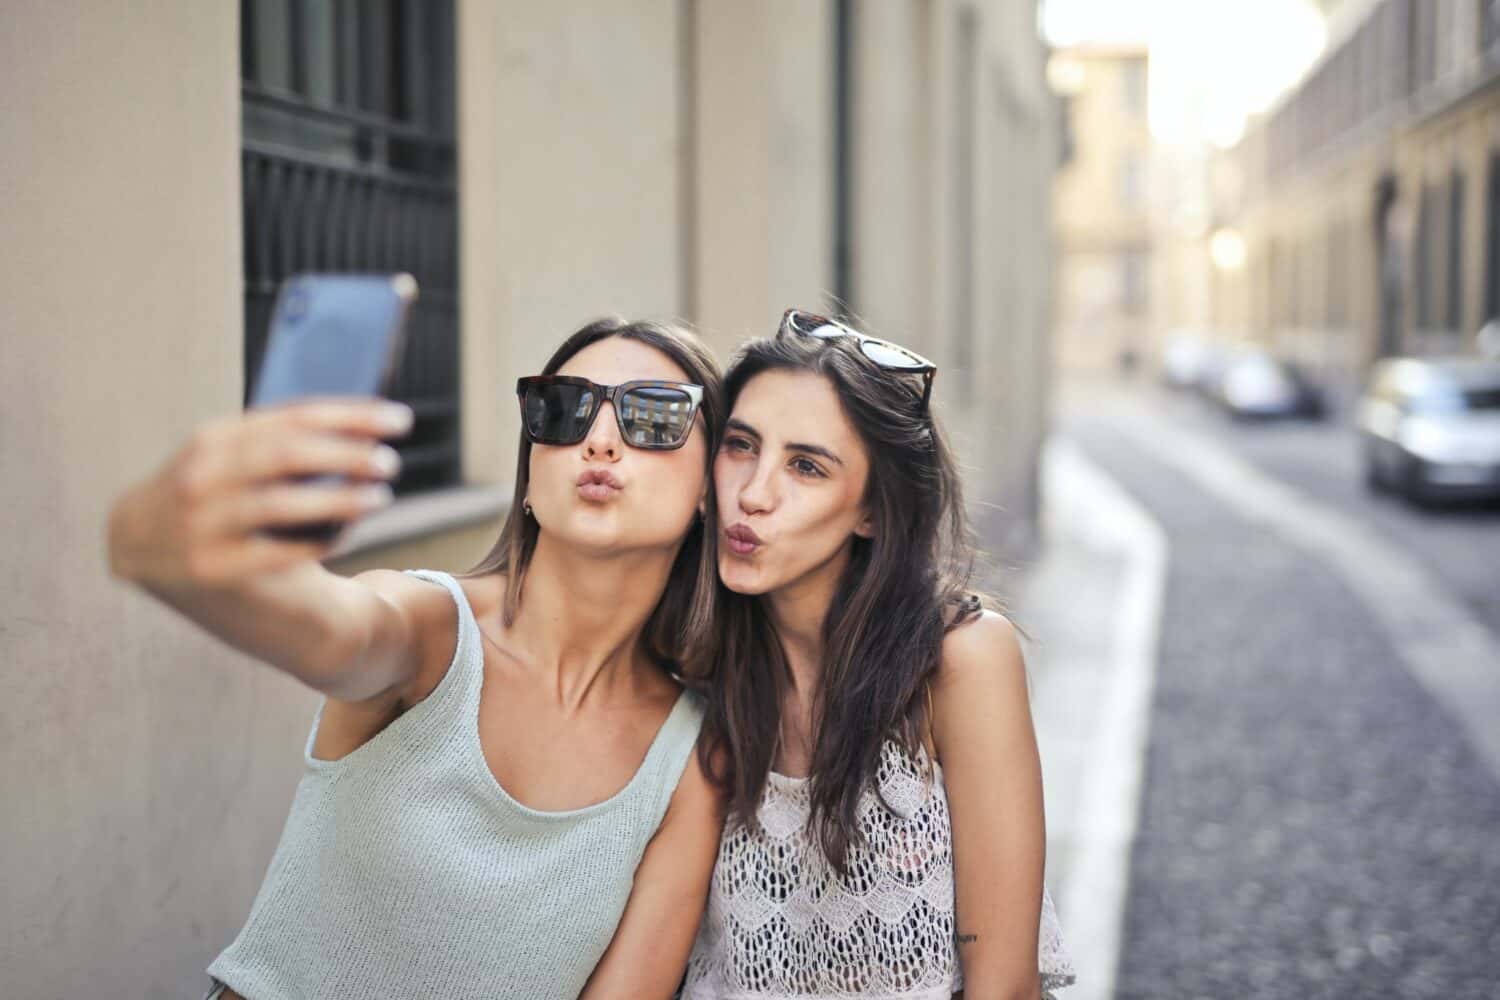 Instagram influencer partnerships for real followers